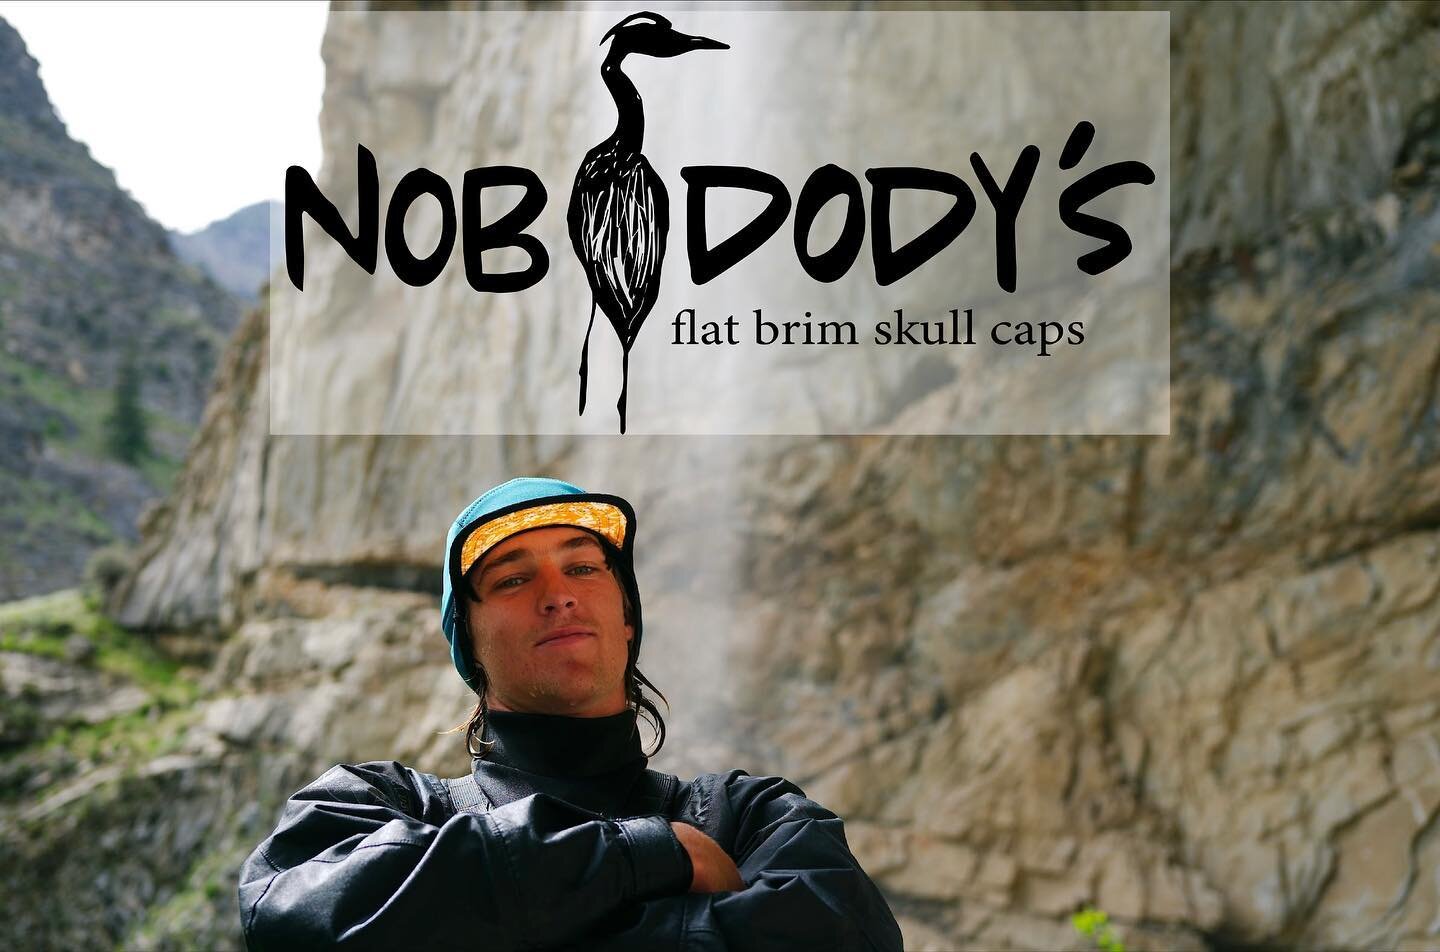 Welcome to Nobdody&rsquo;s Instagram!

We are beyond excited to introduce the Soli, a neoprene flat brim skull cap designed for water sports in all conditions. 

Nobdody&rsquo;s is getting ready to open our website for pre-orders. Follow our instagra